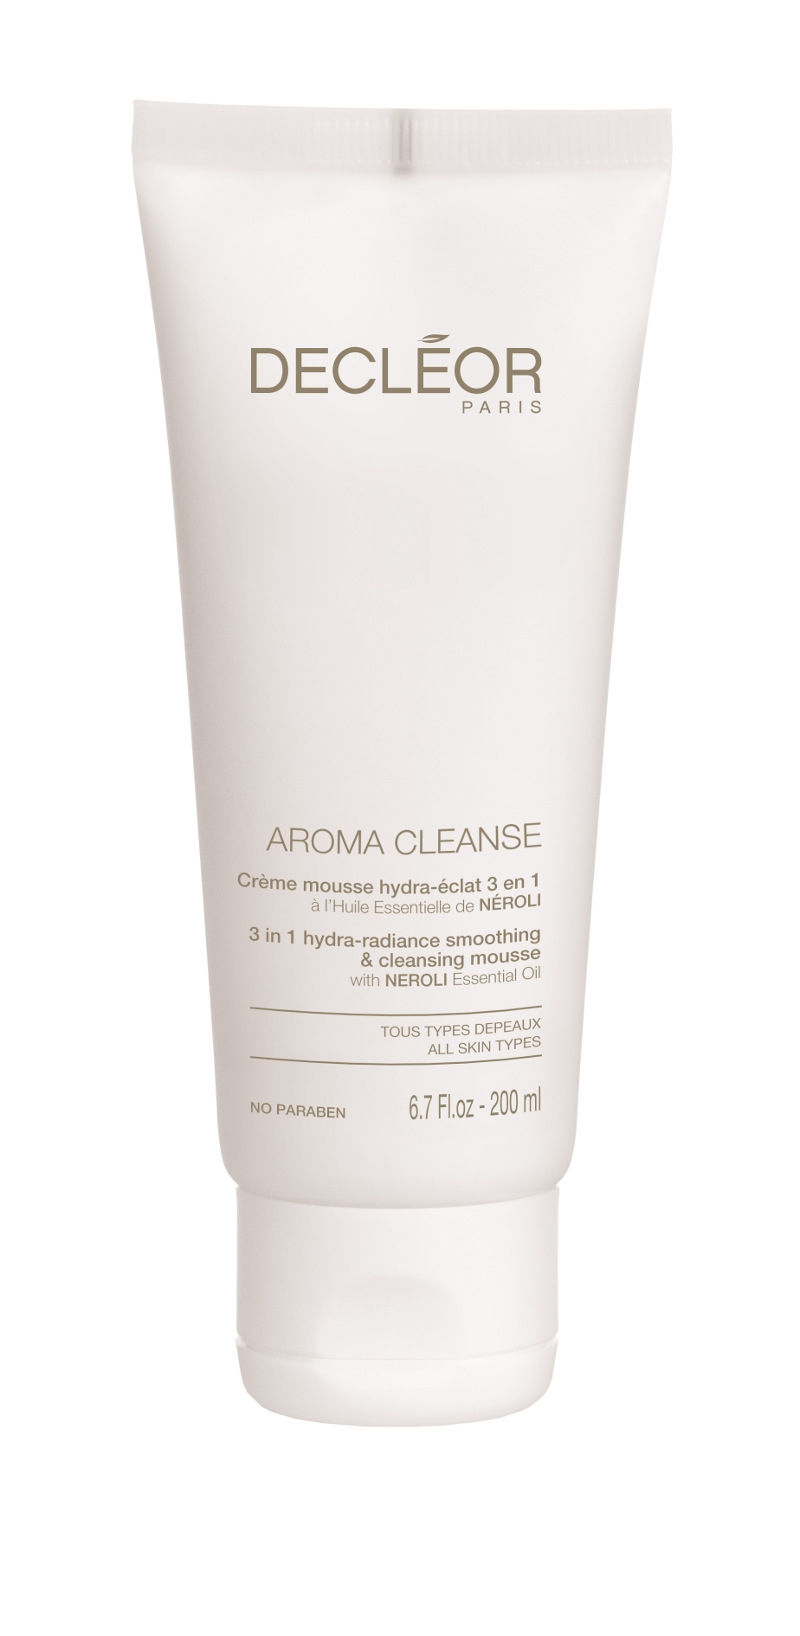 Decleor Aroma Cleanse 3-in-1 Hydra-Radiance Smoothing & Cleansing Mousse 200ml